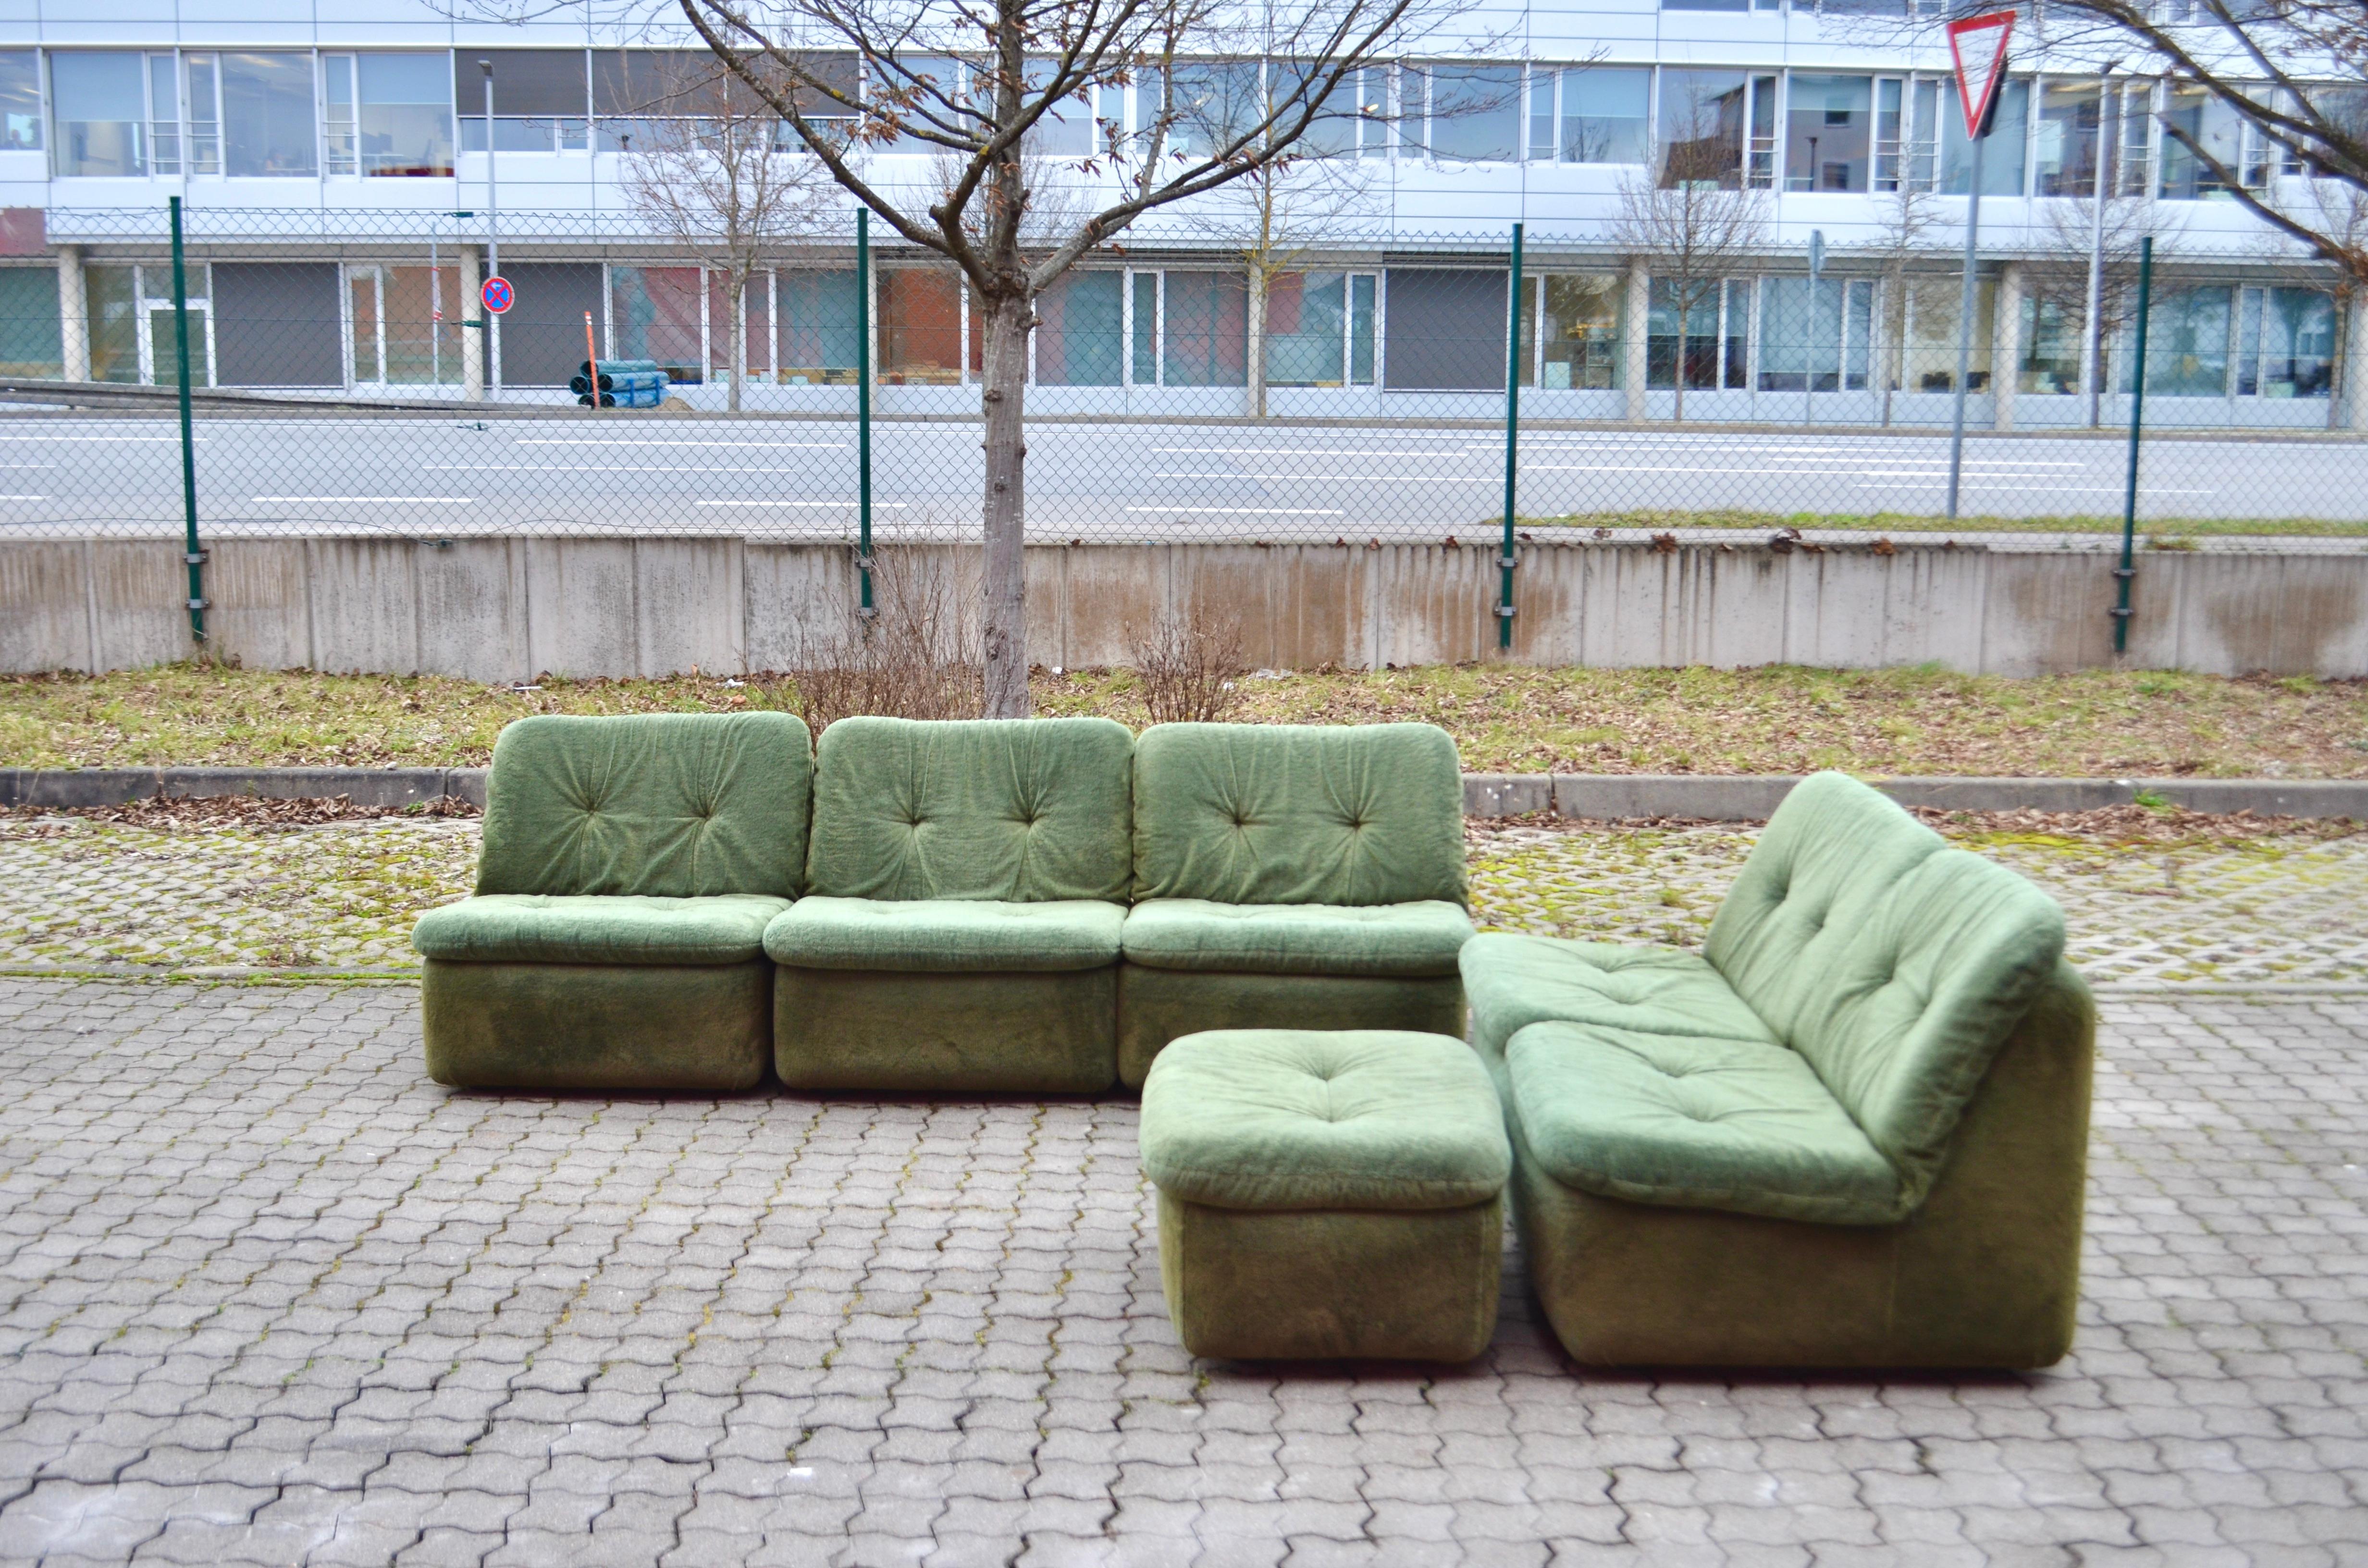 This is a rare and stunning Modular sectional sofa designed by Jo Otterpohl in 1969 for german manufacturer COR.
It is a pure 70ties design.
It consist 5 seating modules with loose cushions.
The fabric is soft Veloursflor and in mossgreen
It is